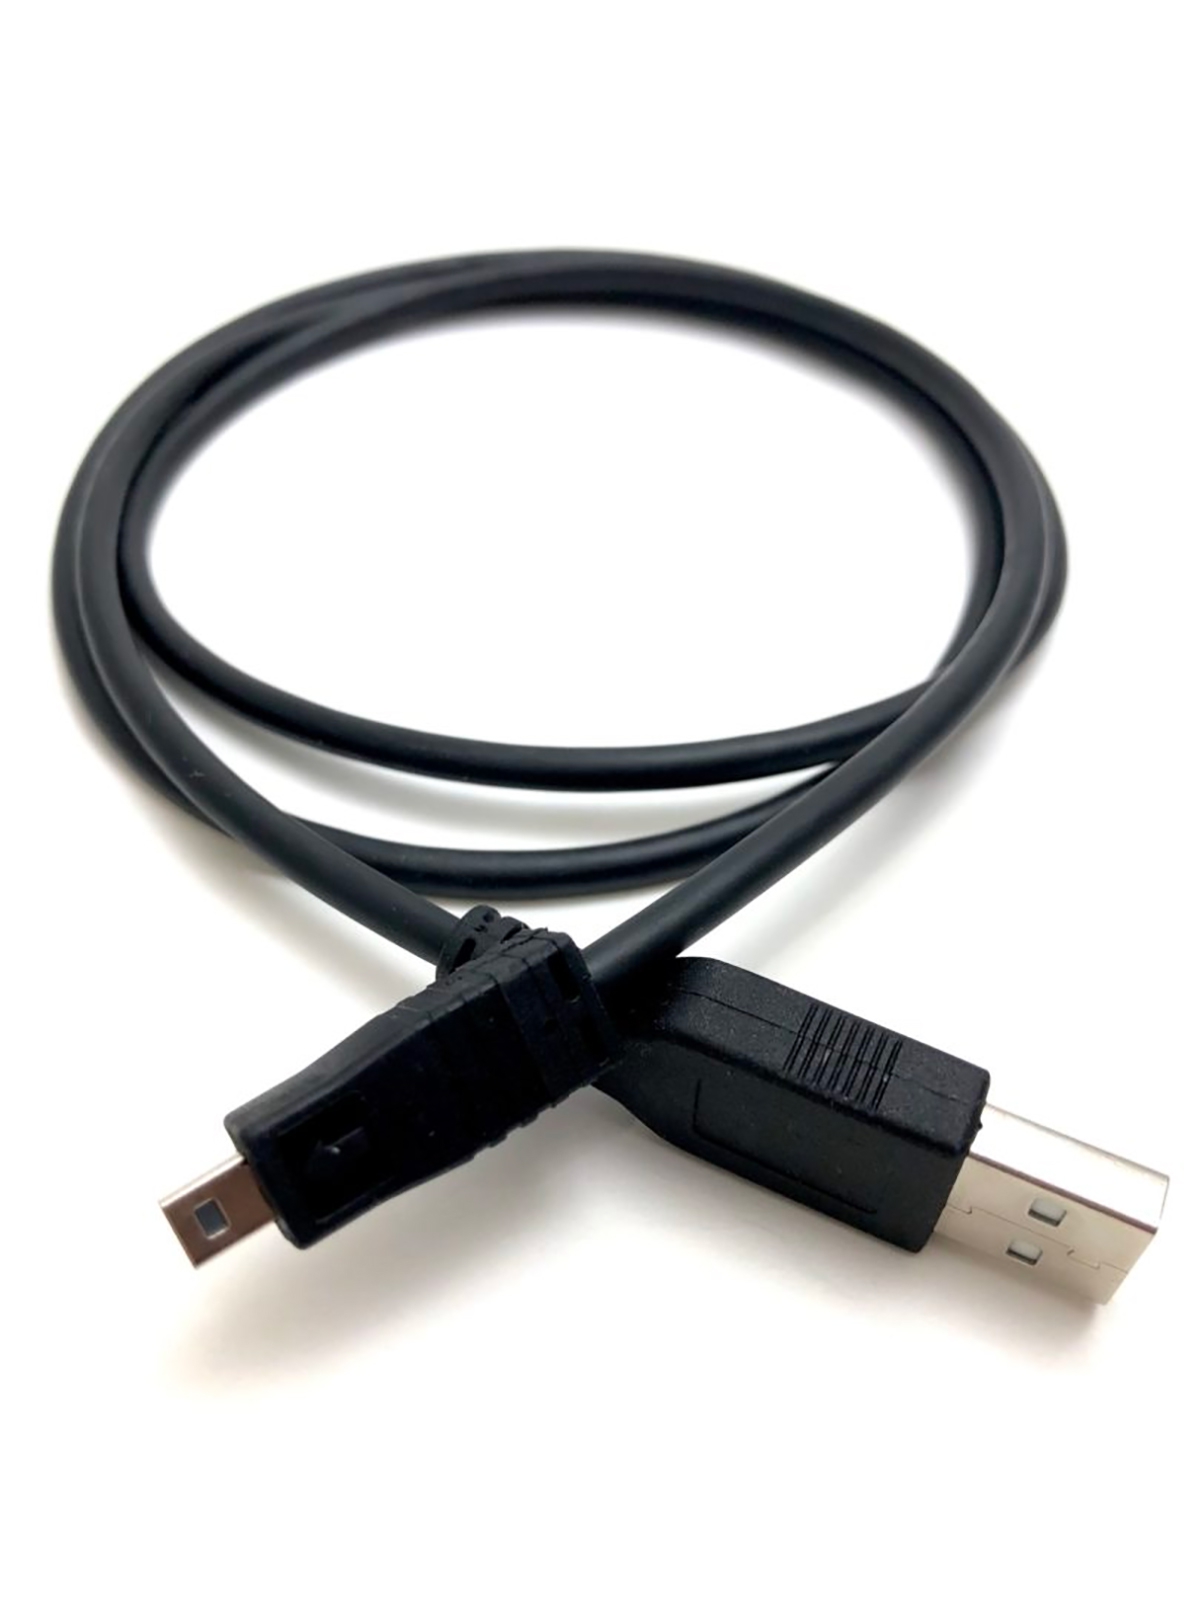 Lightspeed USB-A Adaptor Cable for Delta Zulu Headsets